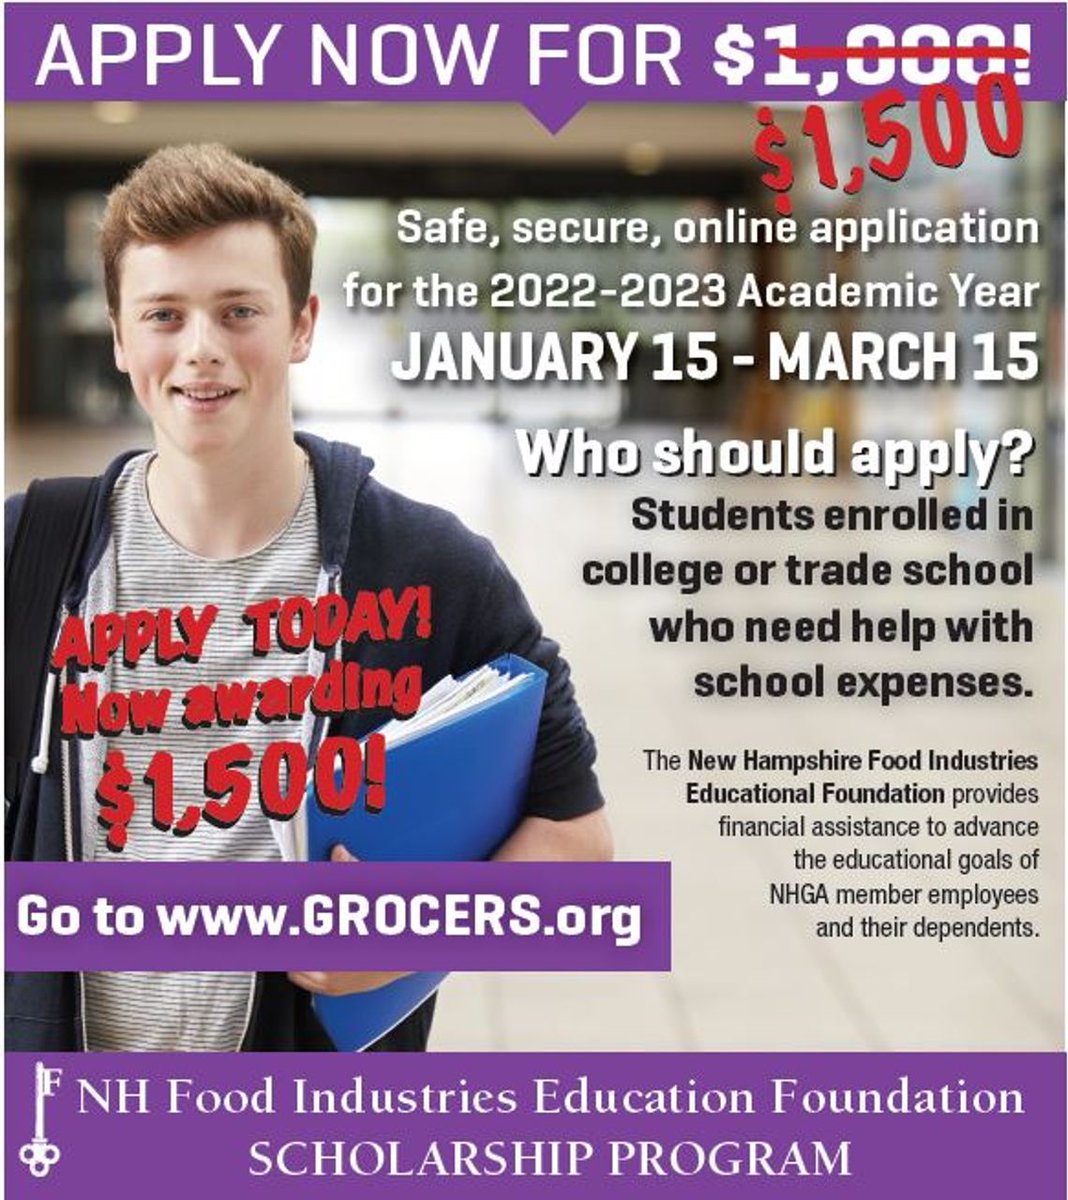 Apply now for the NHIEF Scholarship now 𝐑𝐄𝐖𝐀𝐑𝐃𝐈𝐍𝐆 $𝟏,𝟓𝟎𝟎. Students in enrolled in college or trade school are eligible to apply. Application deadline is March 15th, fill out an application at grocers.org/nhfief/ *Must be a member of NHGA to participate.